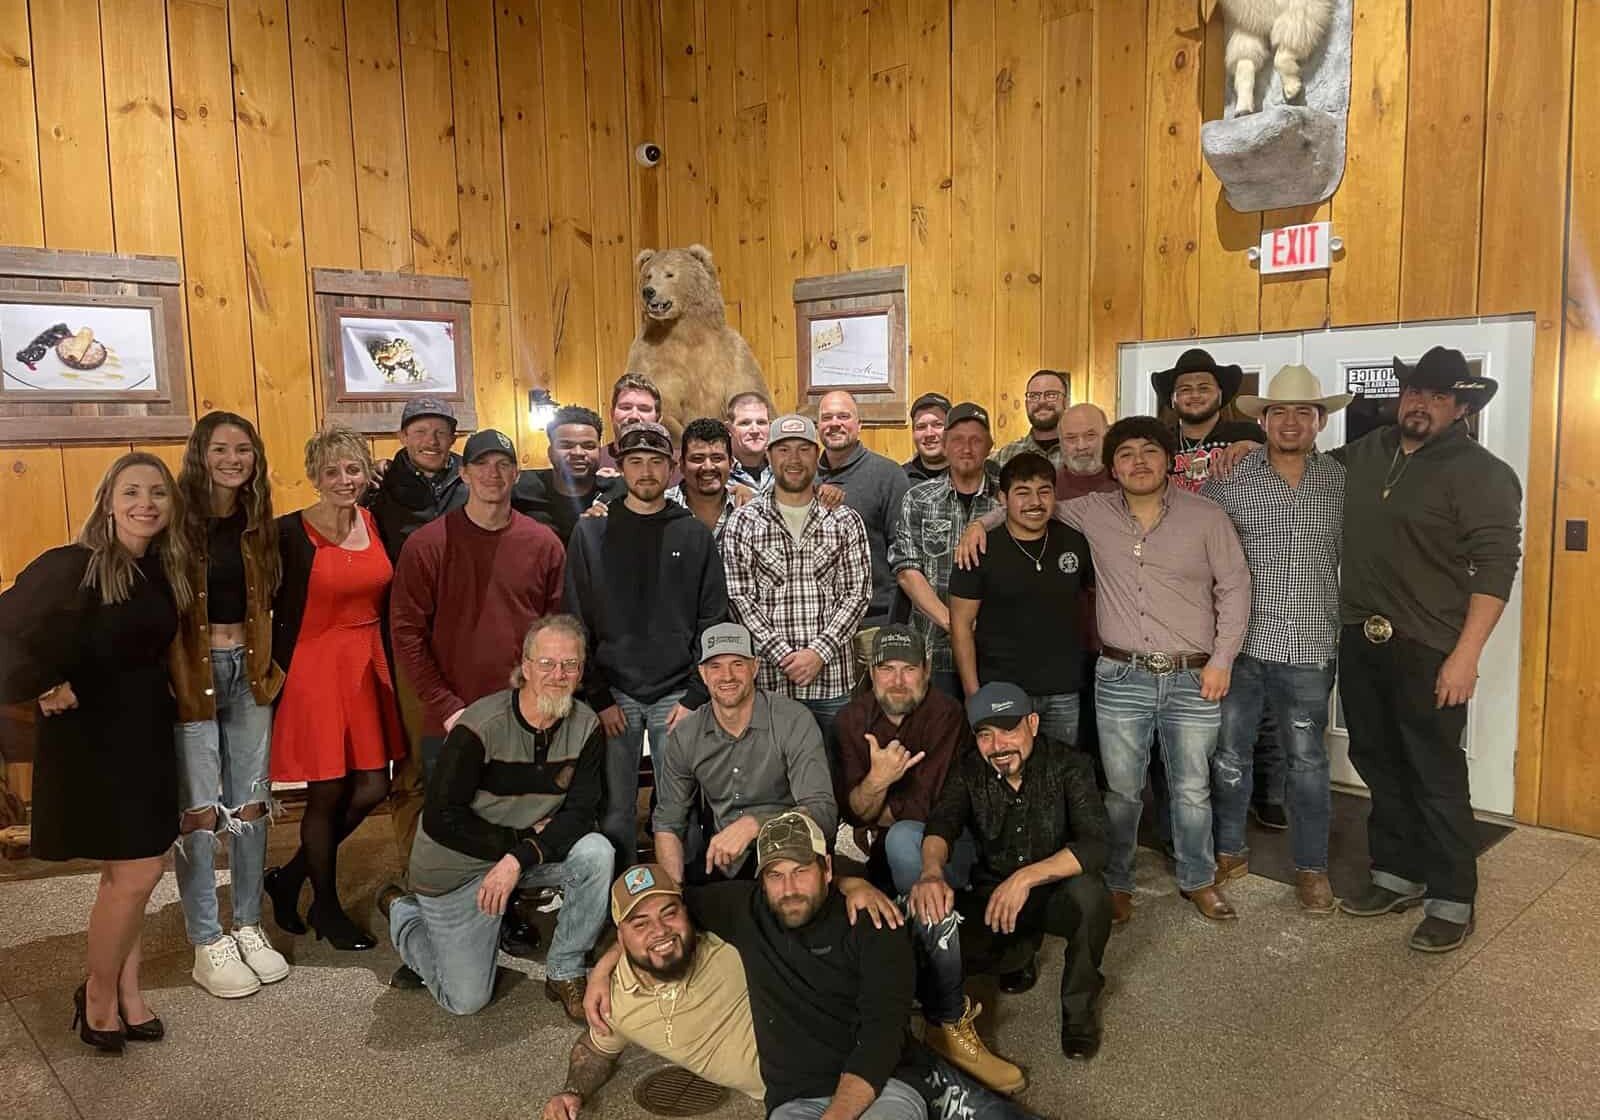 A large group of people posing for a photo in a room with wood paneling and wildlife art on the walls.